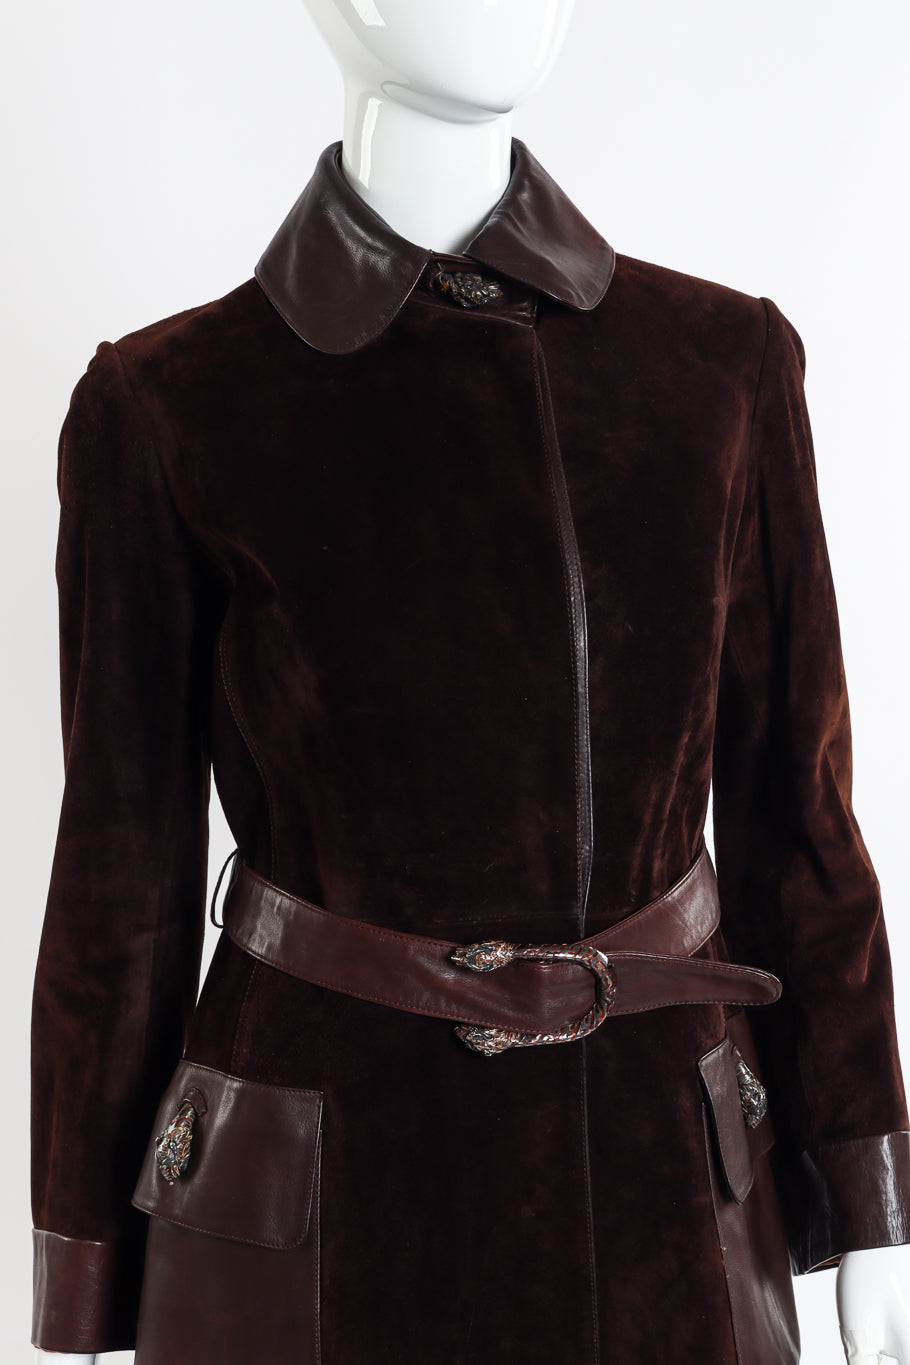 Vintage Gucci Suede and Leather Coat front on mannequin closeup @recessla